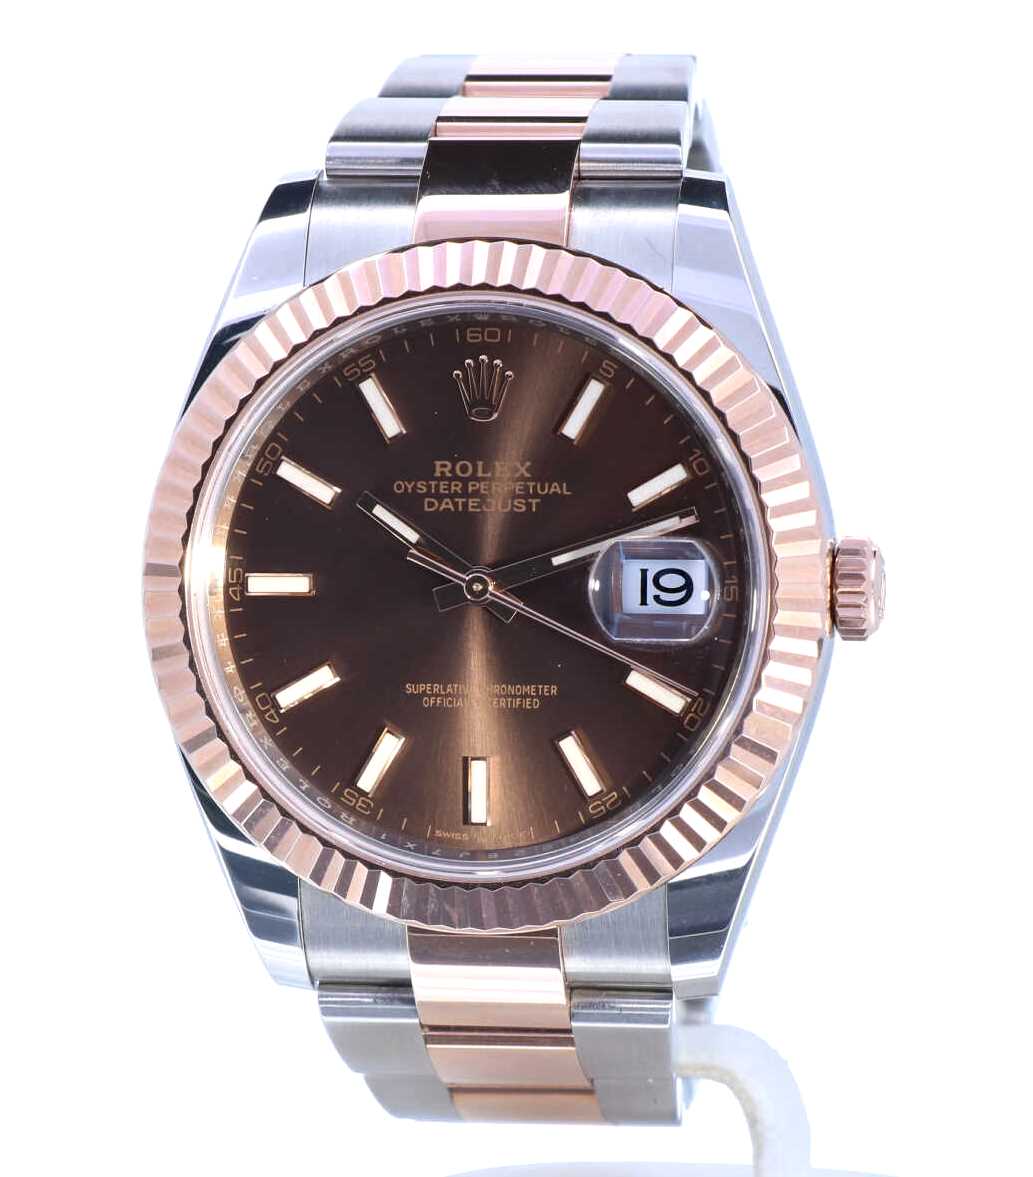 datejust chocolate dial